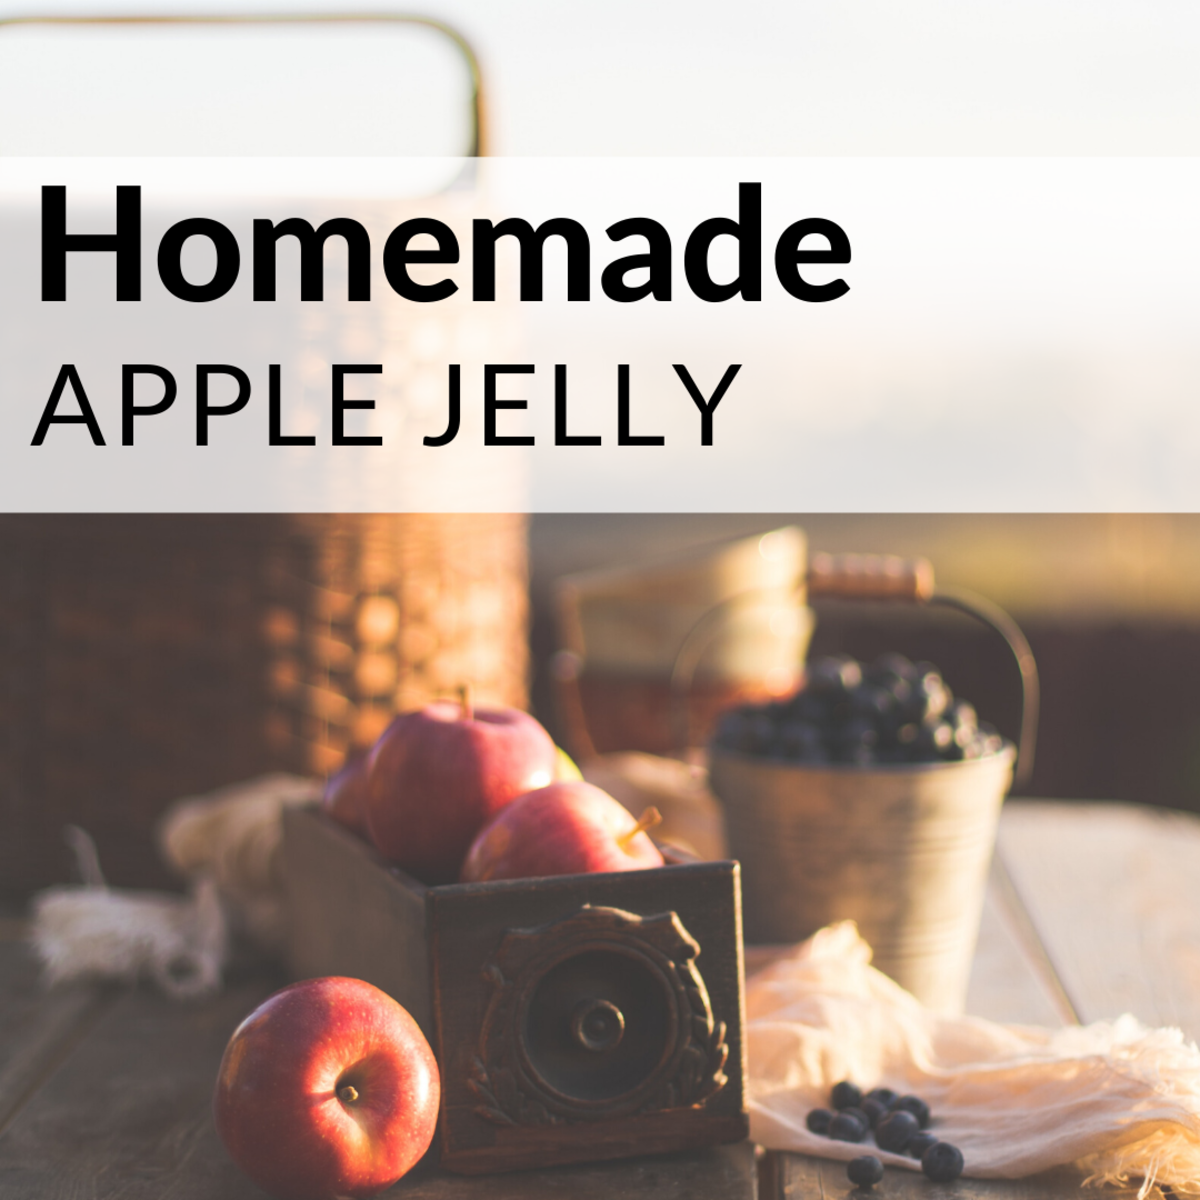 How to Make Apple Jelly That Everyone Will Love